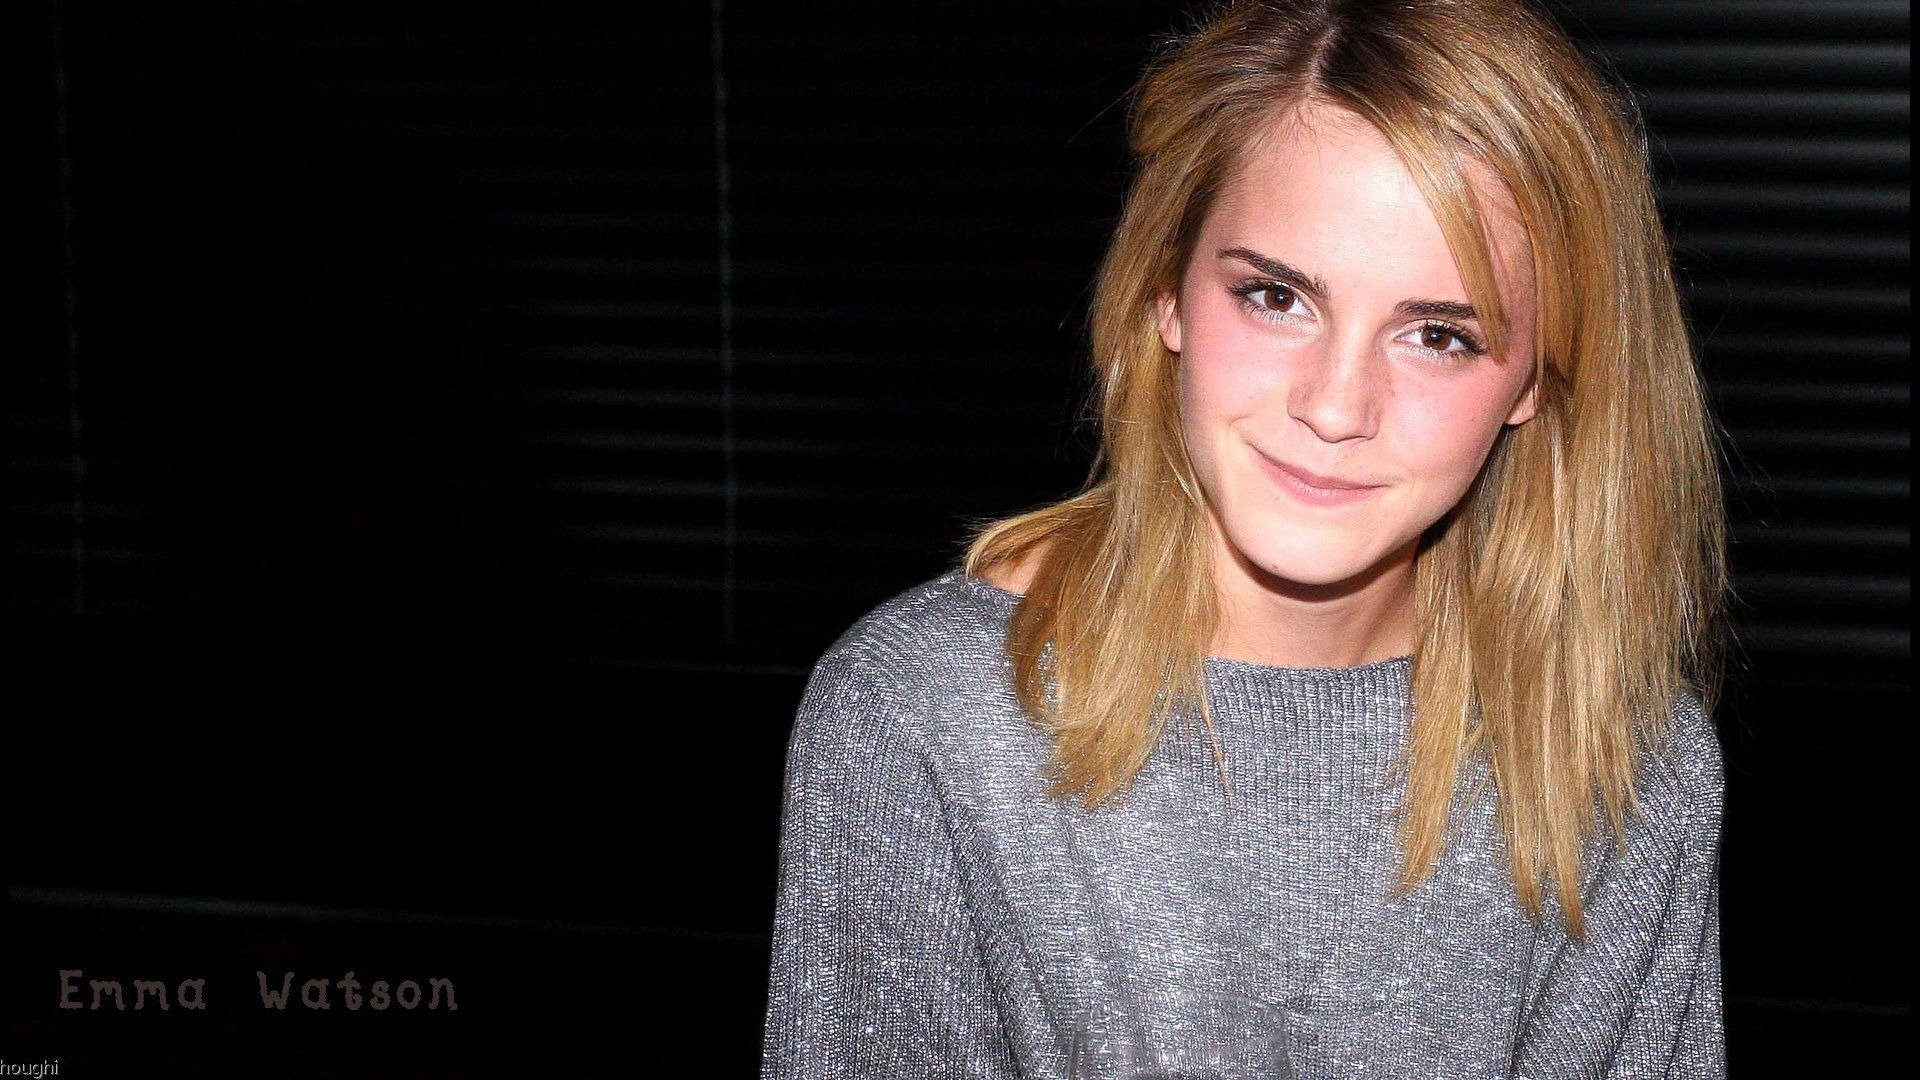 Emma Watson #010 - 1920x1080 Wallpapers Pictures Photos Images